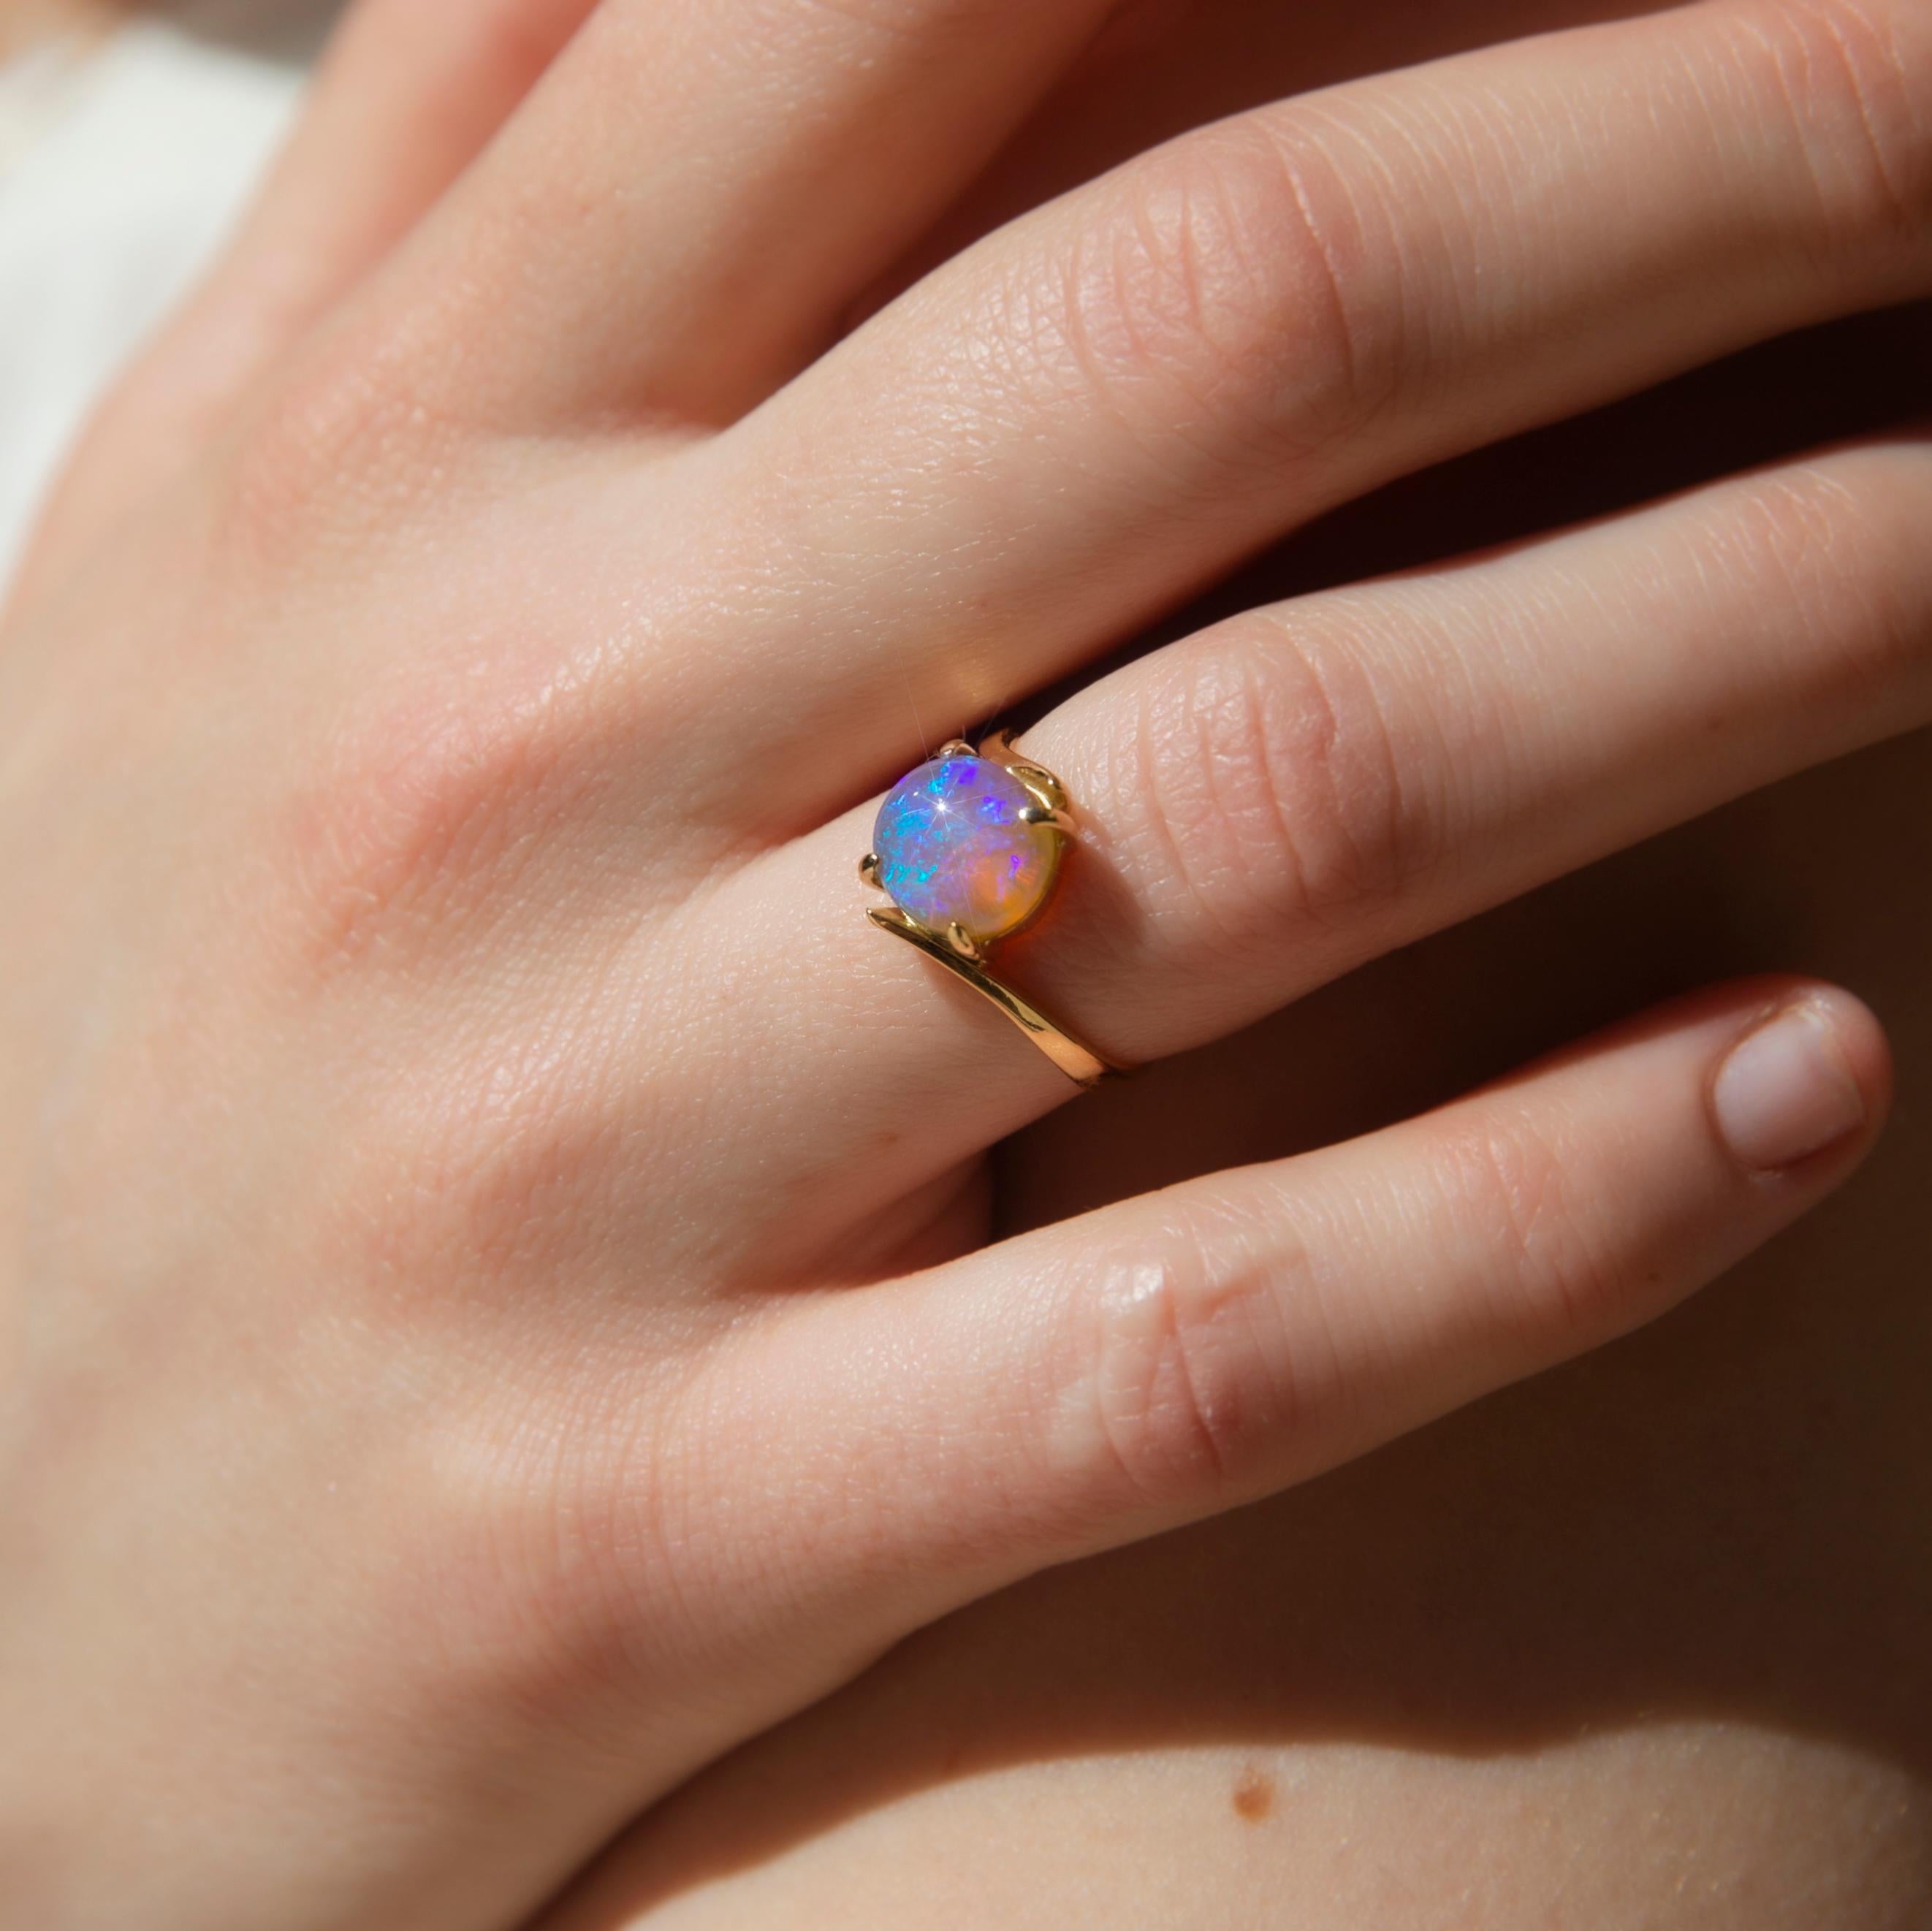 Crafted in 18 carat gold, The Monique Ring curves gently around the crystal opal, raising it into the light and radiating soft hues of green and red. From the earth of the outback she brings such ethereal beauty.  

The Monique Ring Gem Details
The